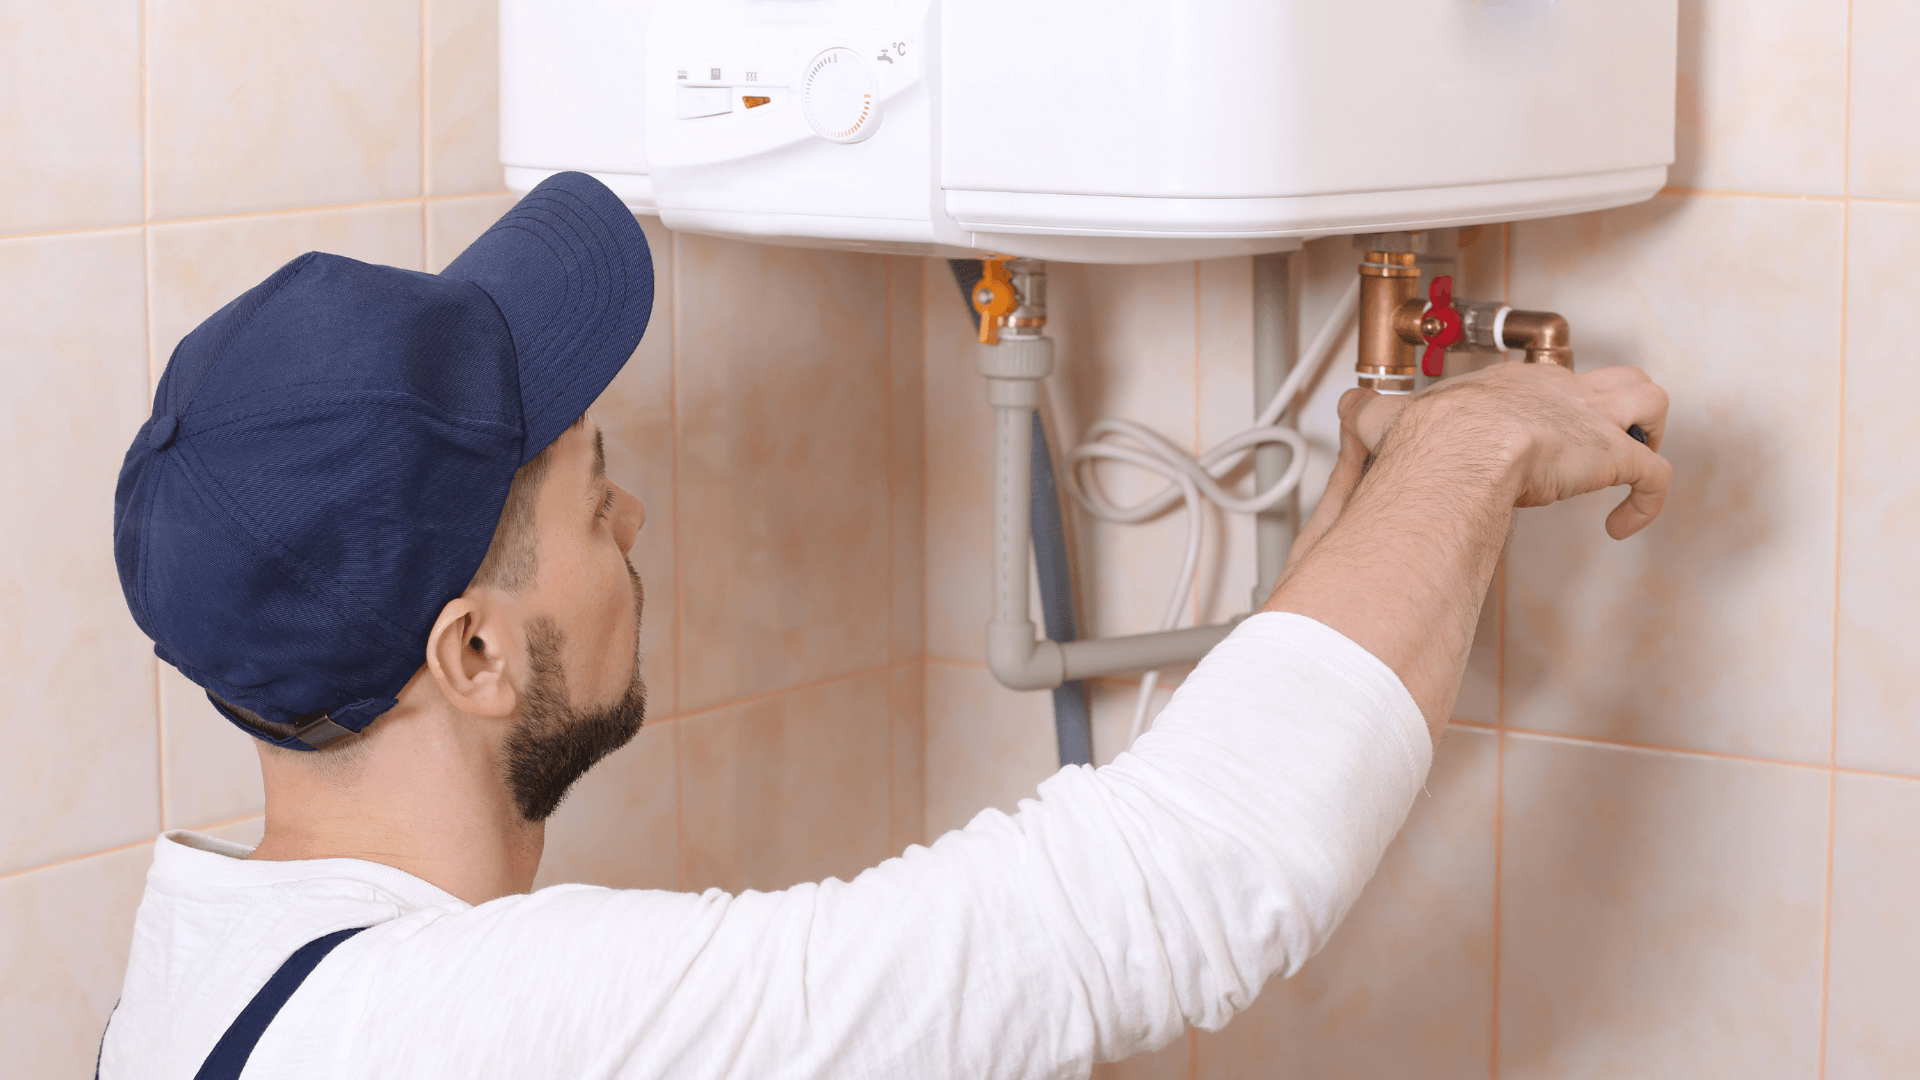 On demand hot water  heater replacement